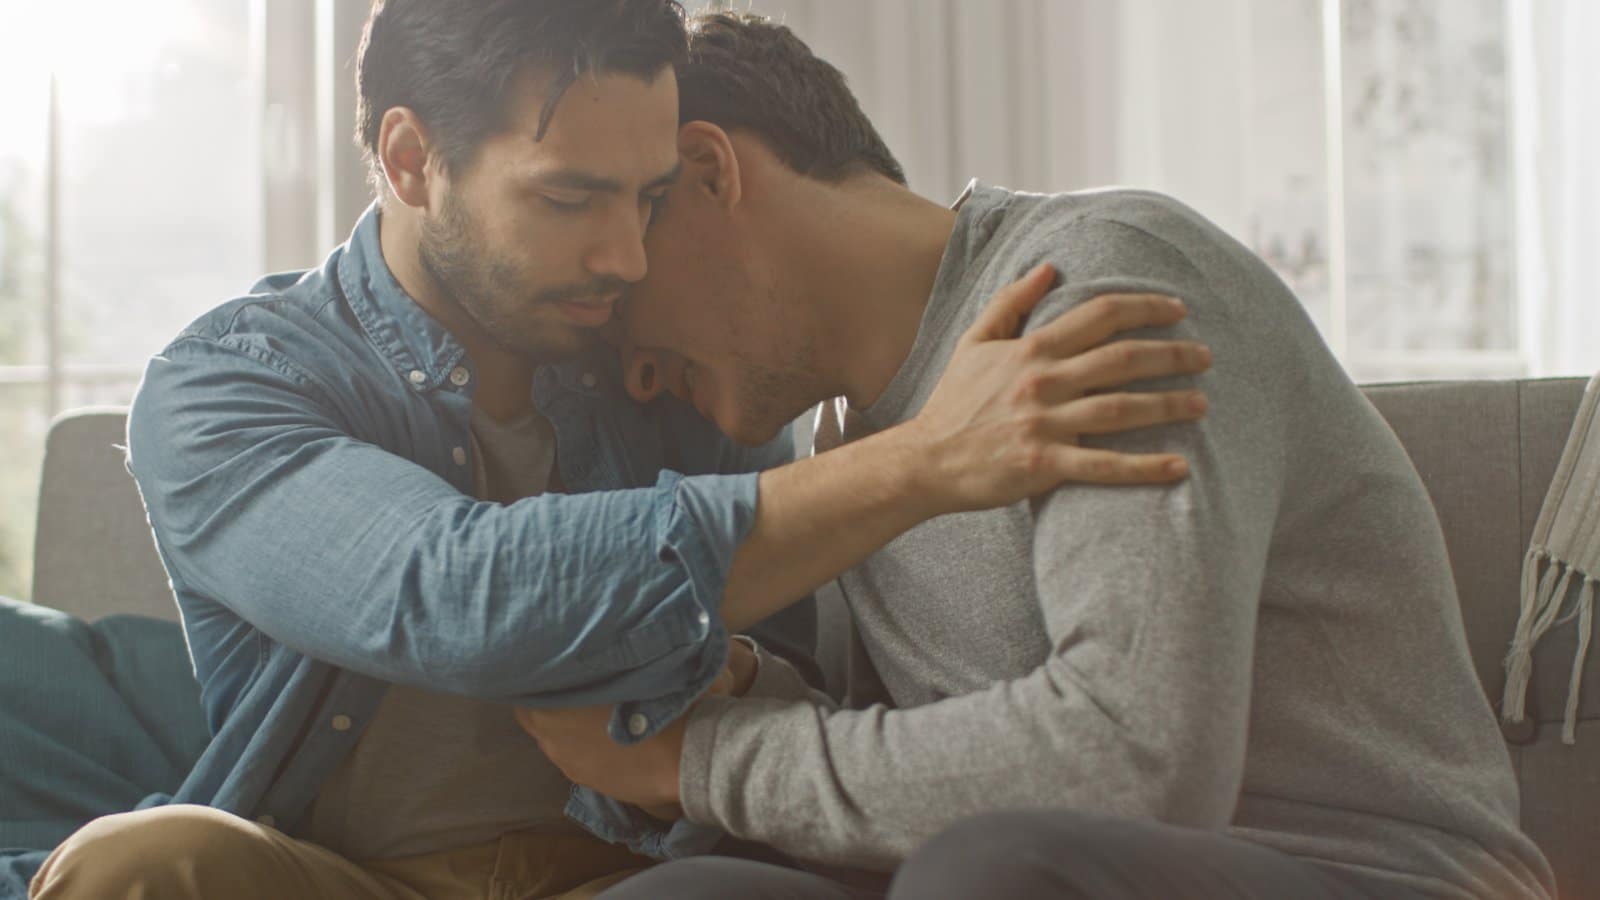 Image Credit: Shutterstock / Gorodenkoff <p><span>Gynosexuals may face challenges in gaining recognition and acceptance due to the less widely understood nature of their attraction. Misconceptions and lack of visibility in mainstream media can lead to confusion and isolation for individuals identifying as gynosexual.</span></p>